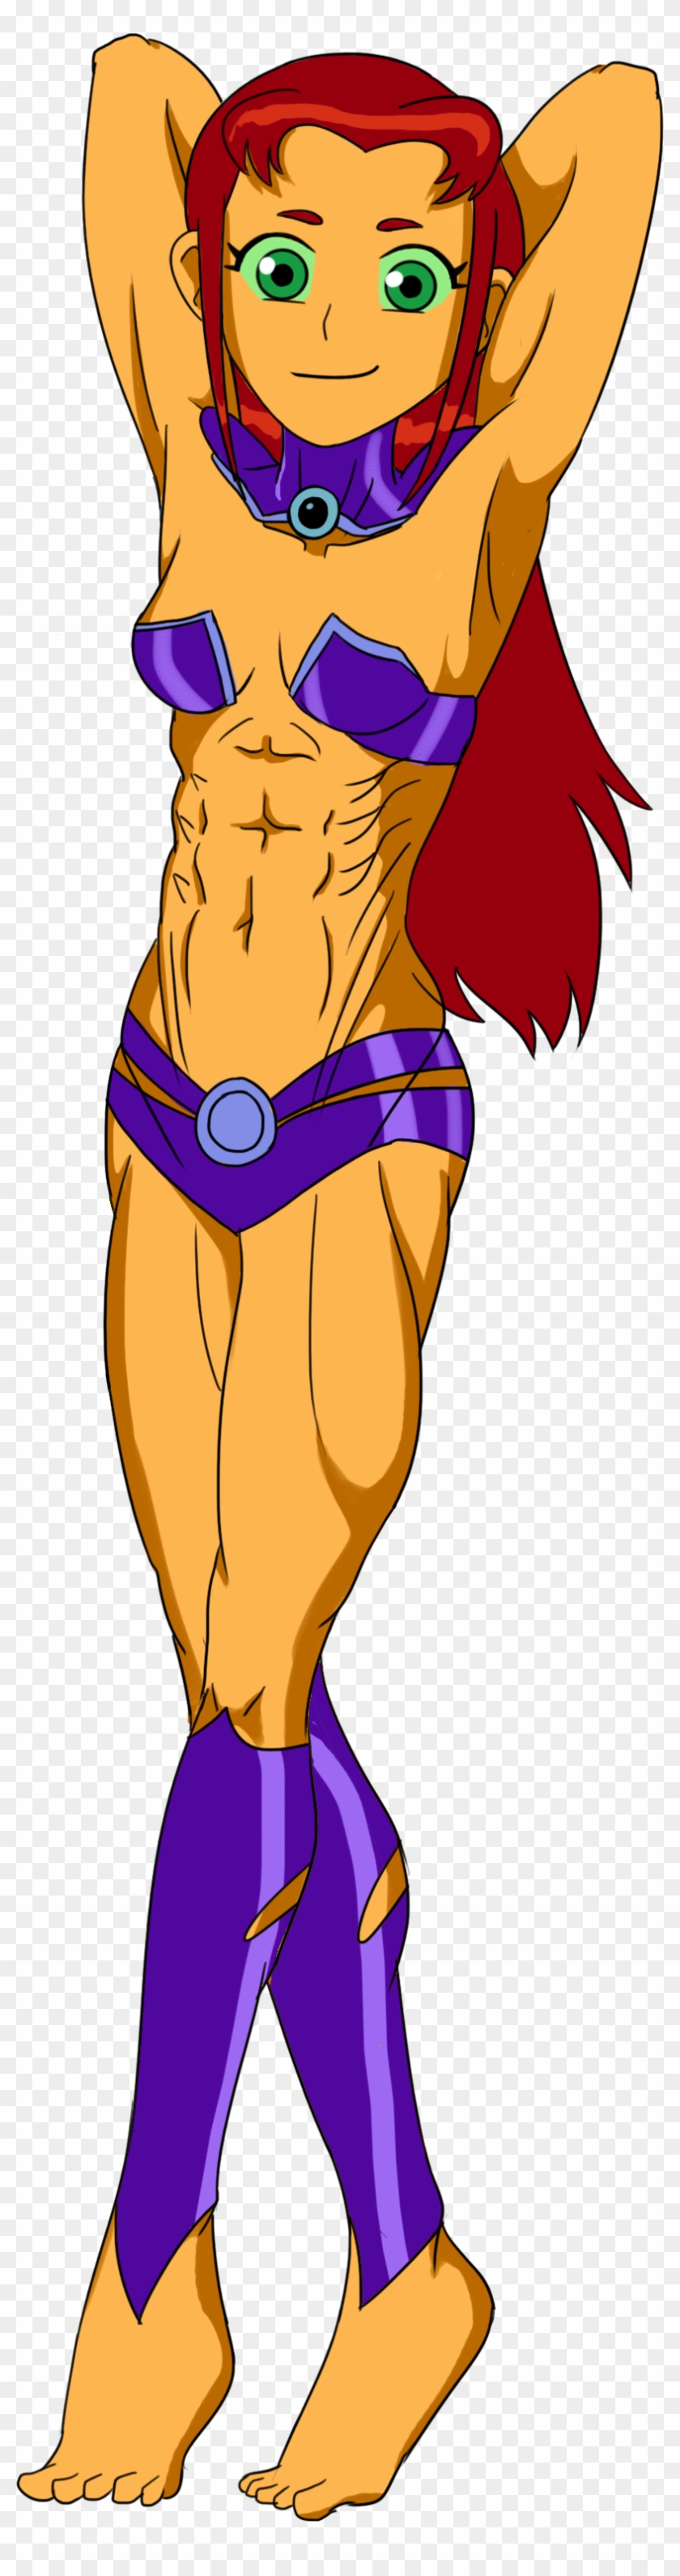 Starfire Teen Titans Go Wiki Fandom Powered By Wikia,starfire - Teen Titans  Starfire Fan Art - Free Transparent PNG Clipart Images Download